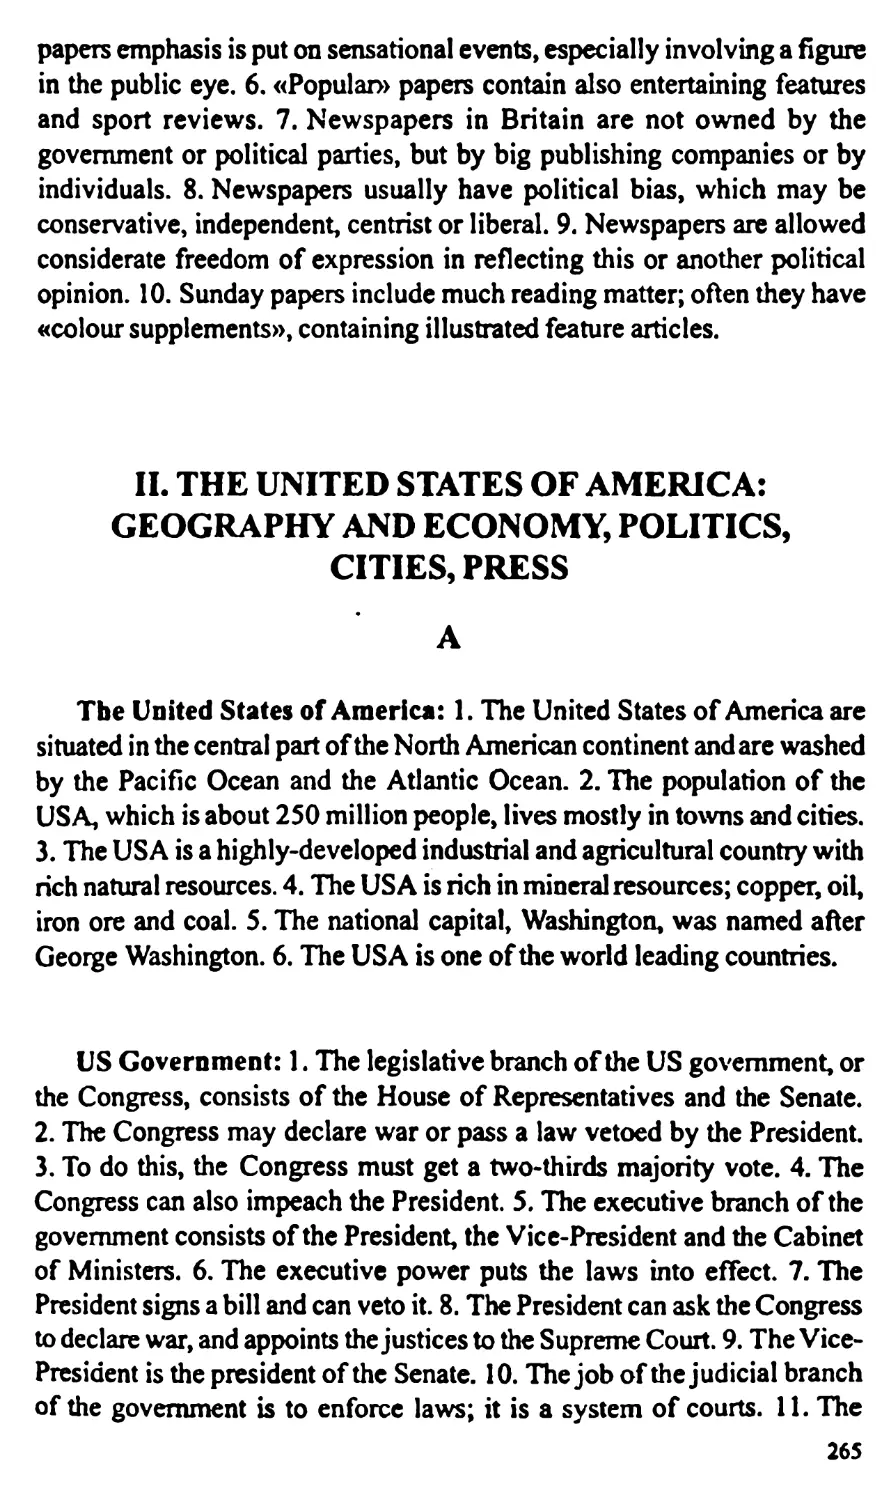 II.	THE UNITED STATES OF AMERICA: GEOGRAPHY AND ECONOMY, POLITICS, CITIES, PRESS